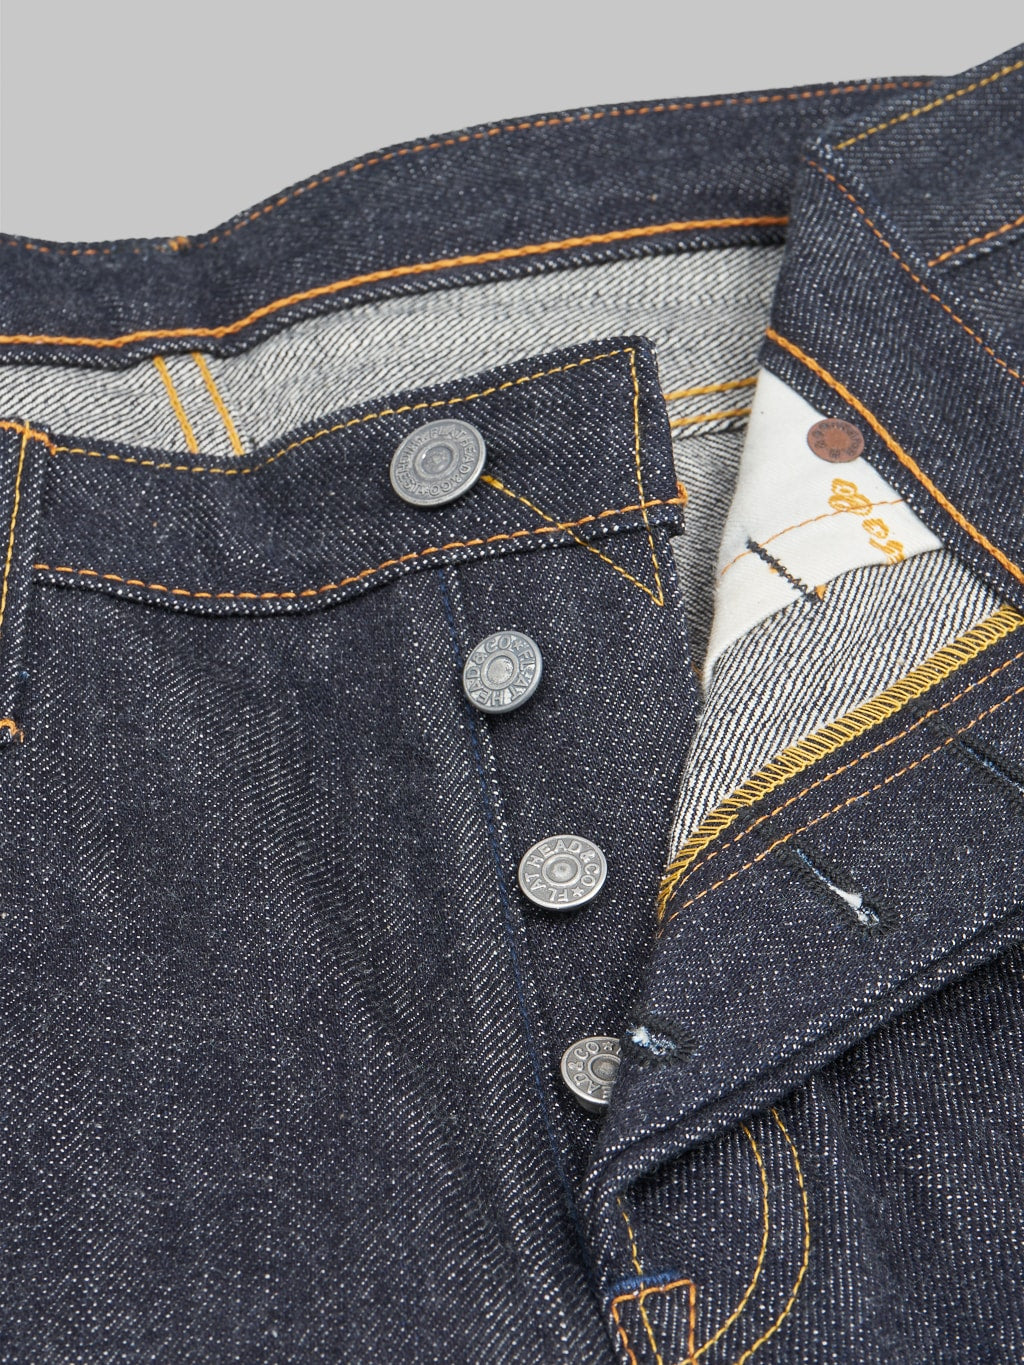 The Flat Head D306 Tight Tapered Jeans  buttons